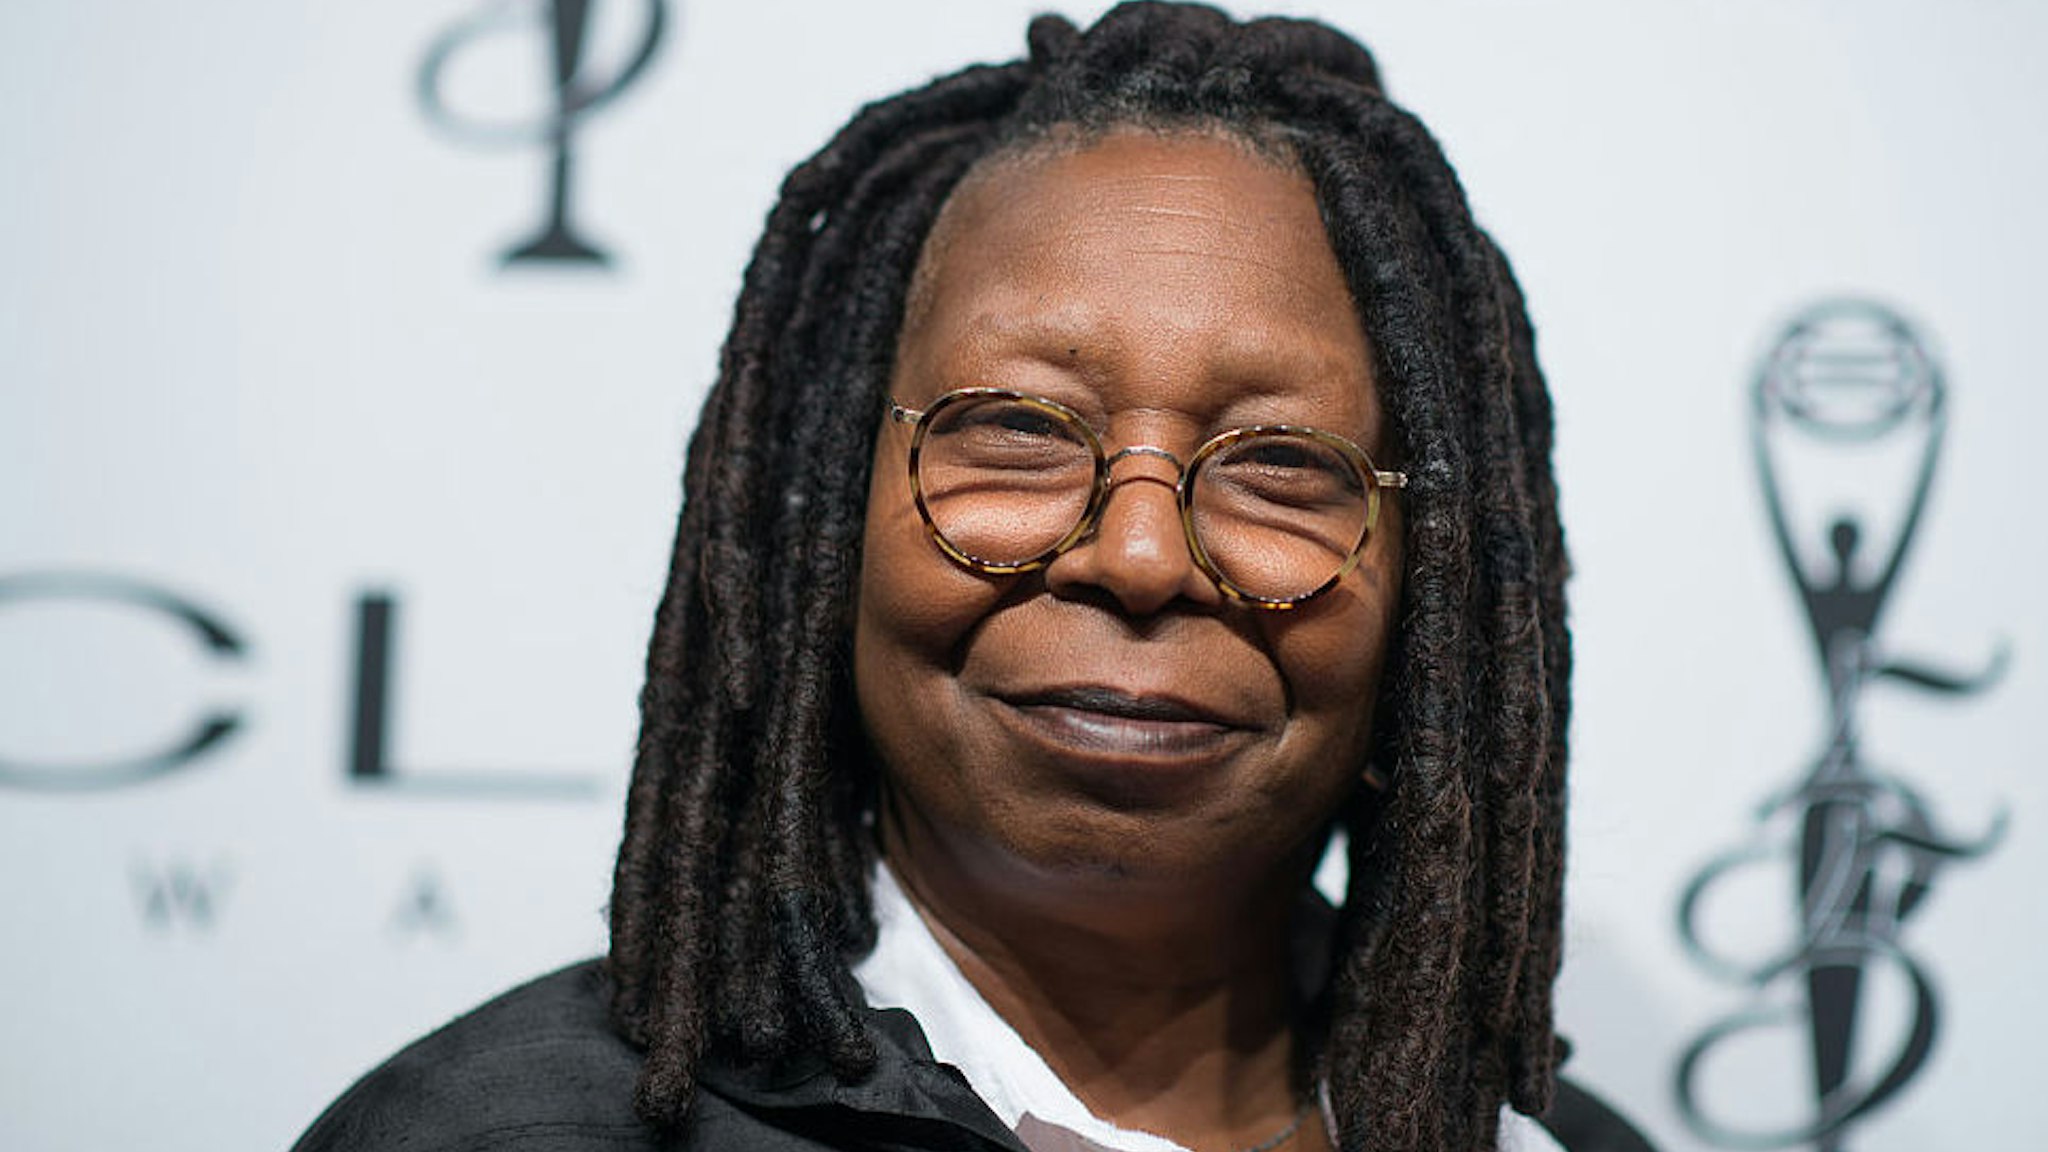 Whoopi Goldberg arrives at 55th Annual CLIO Awards at Cipriani Wall Street on October 1, 2014 in New York City.